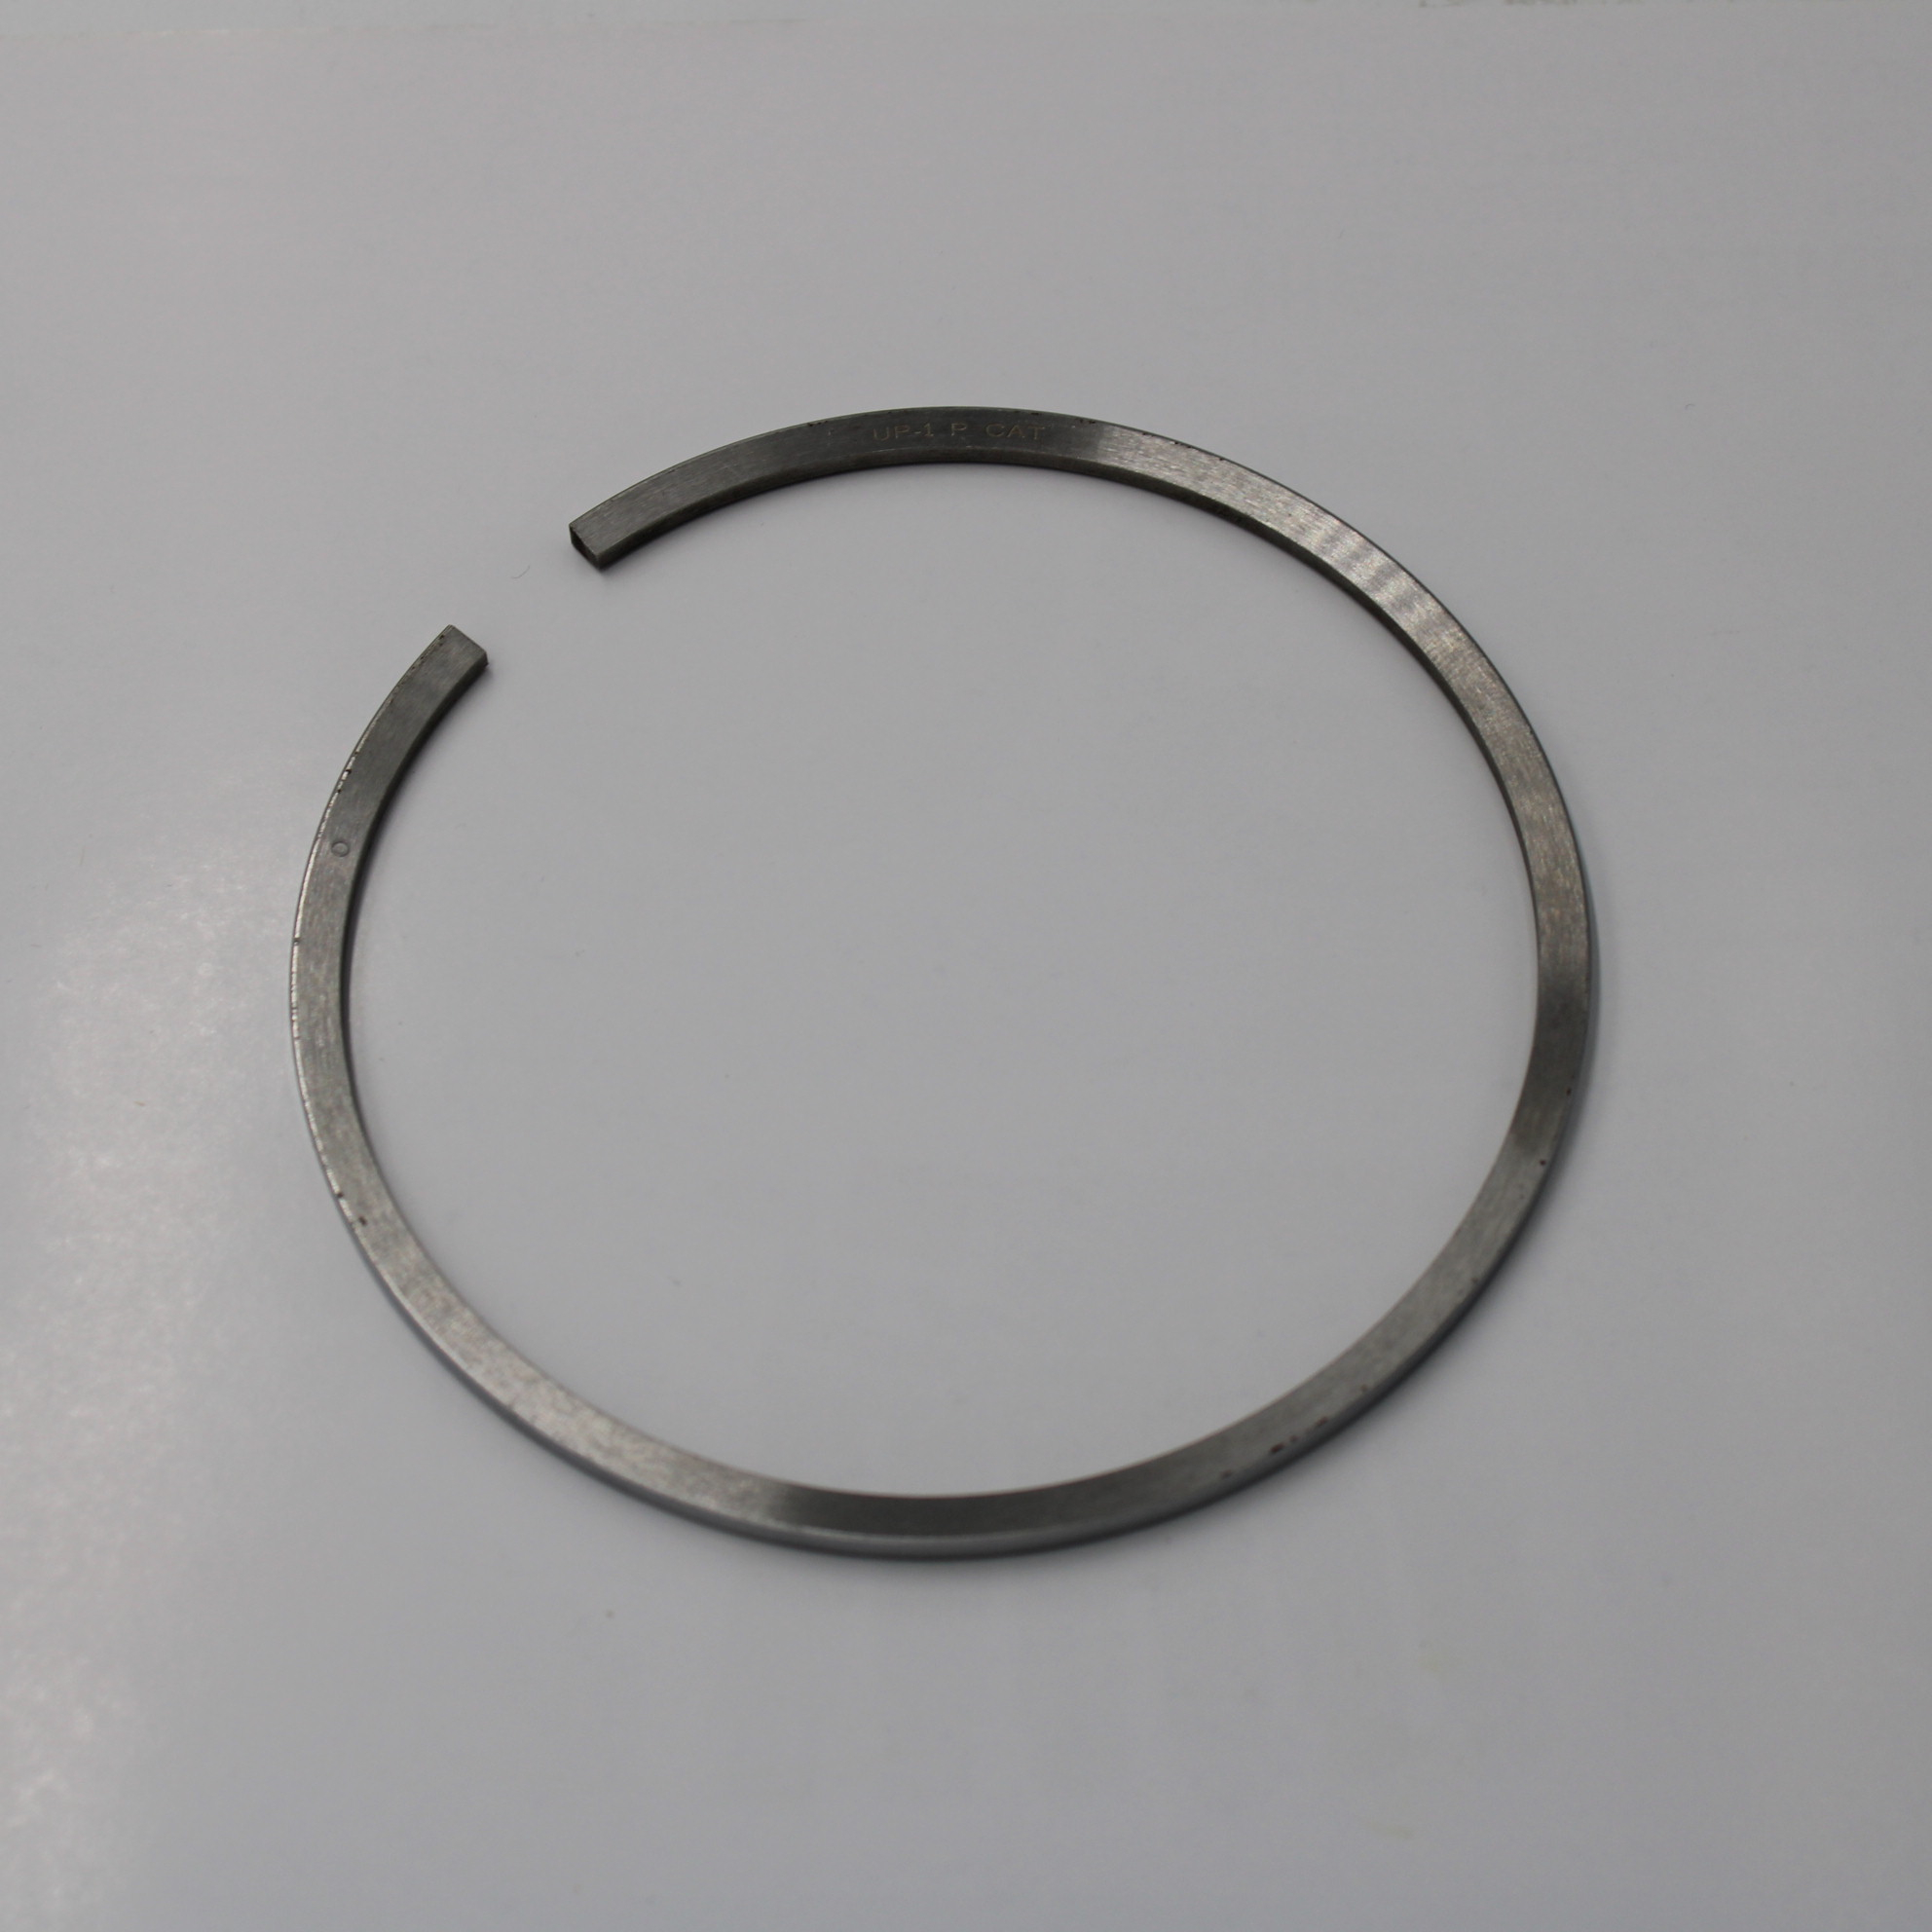 Piston ring 197-9386 for caterpillar C7 engine and 197-9386 for caterpillar 324d / 328d / 329d / 309d engine 